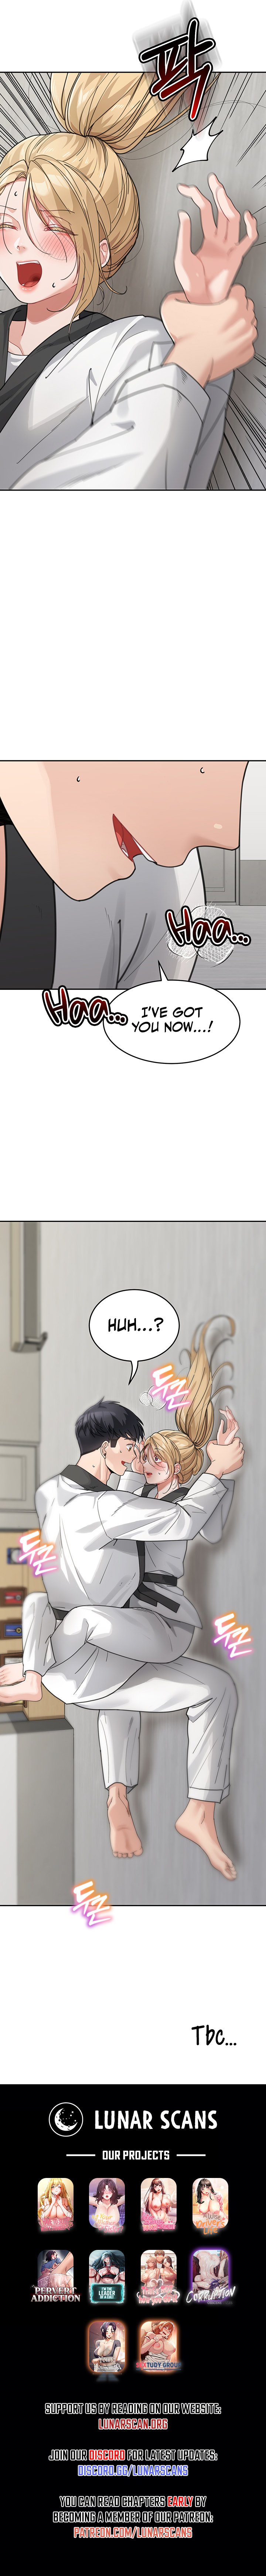 is-it-your-mother-or-sister-chap-30-9